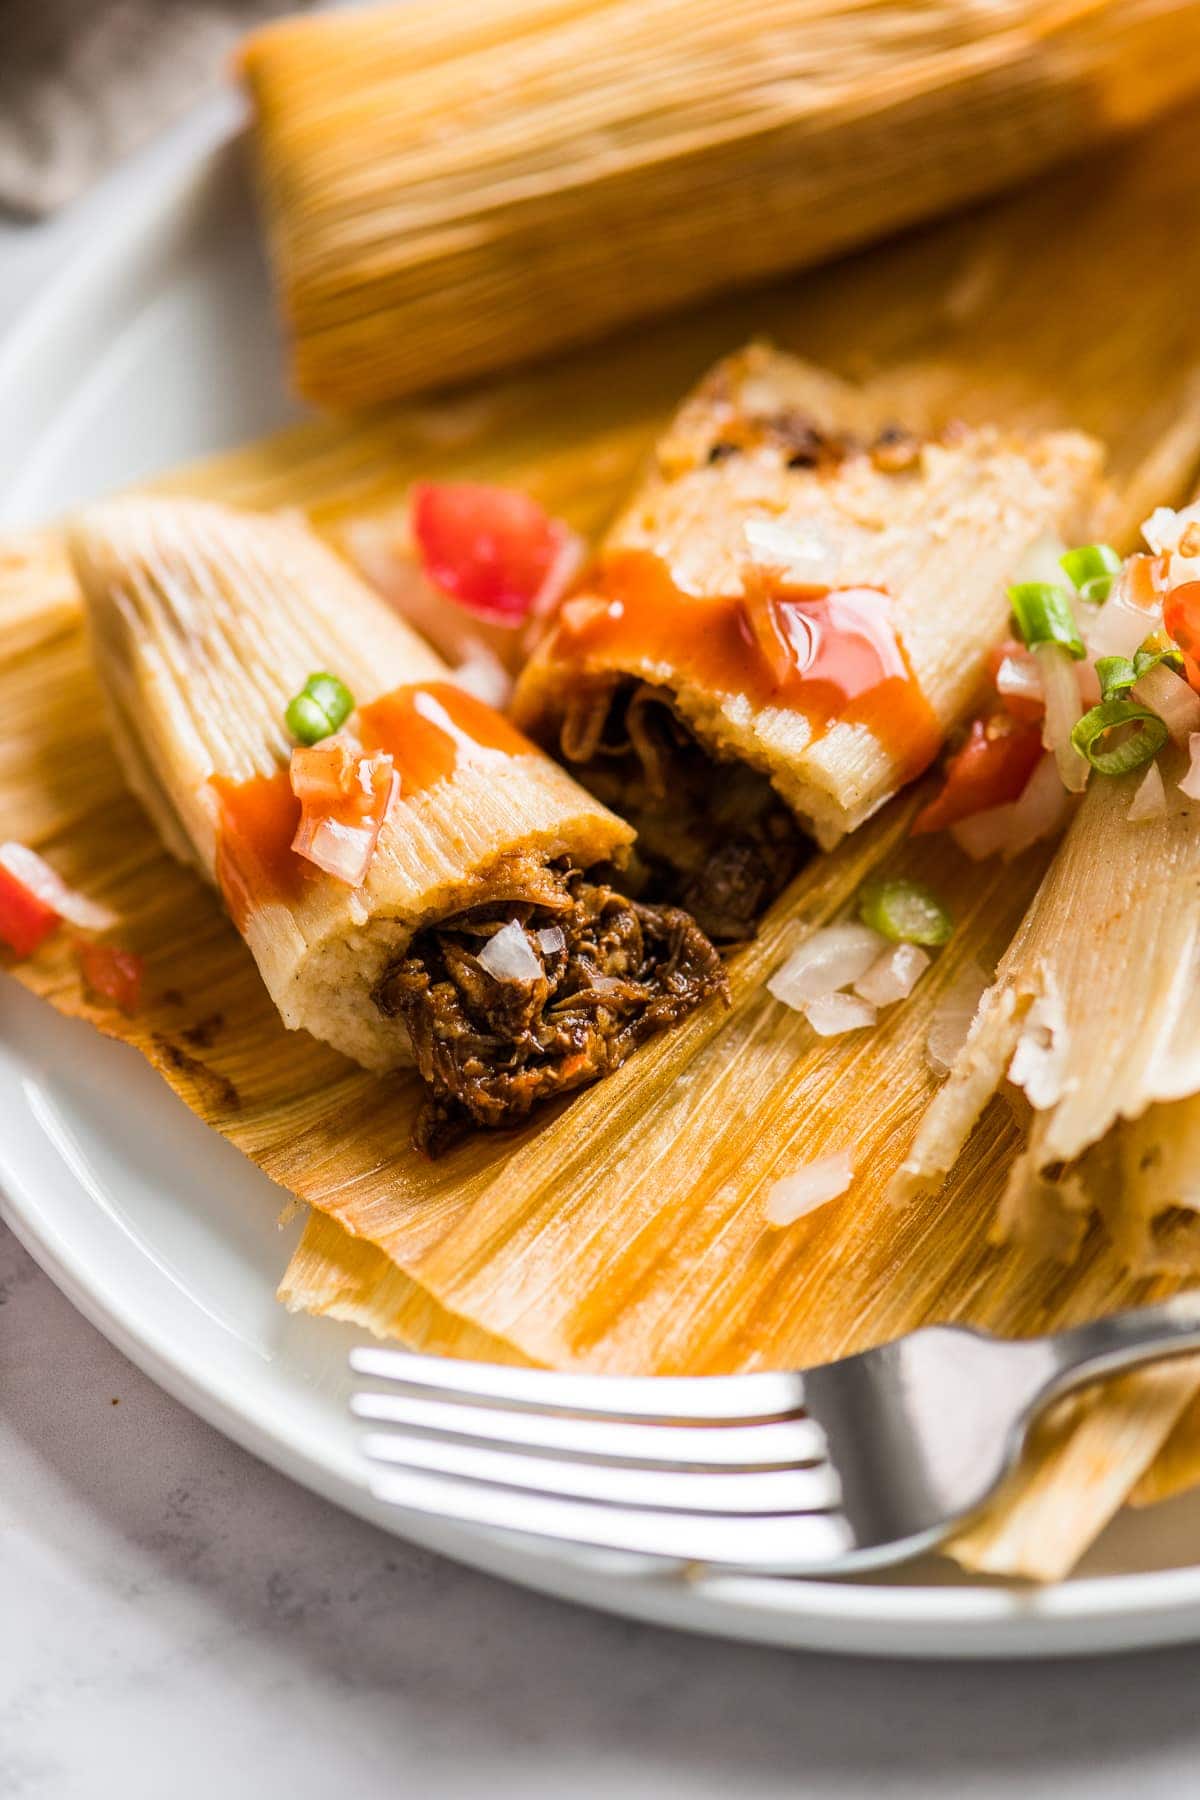 https://www.isabeleats.com/wp-content/uploads/2020/12/instant-pot-tamales-small-16.jpg